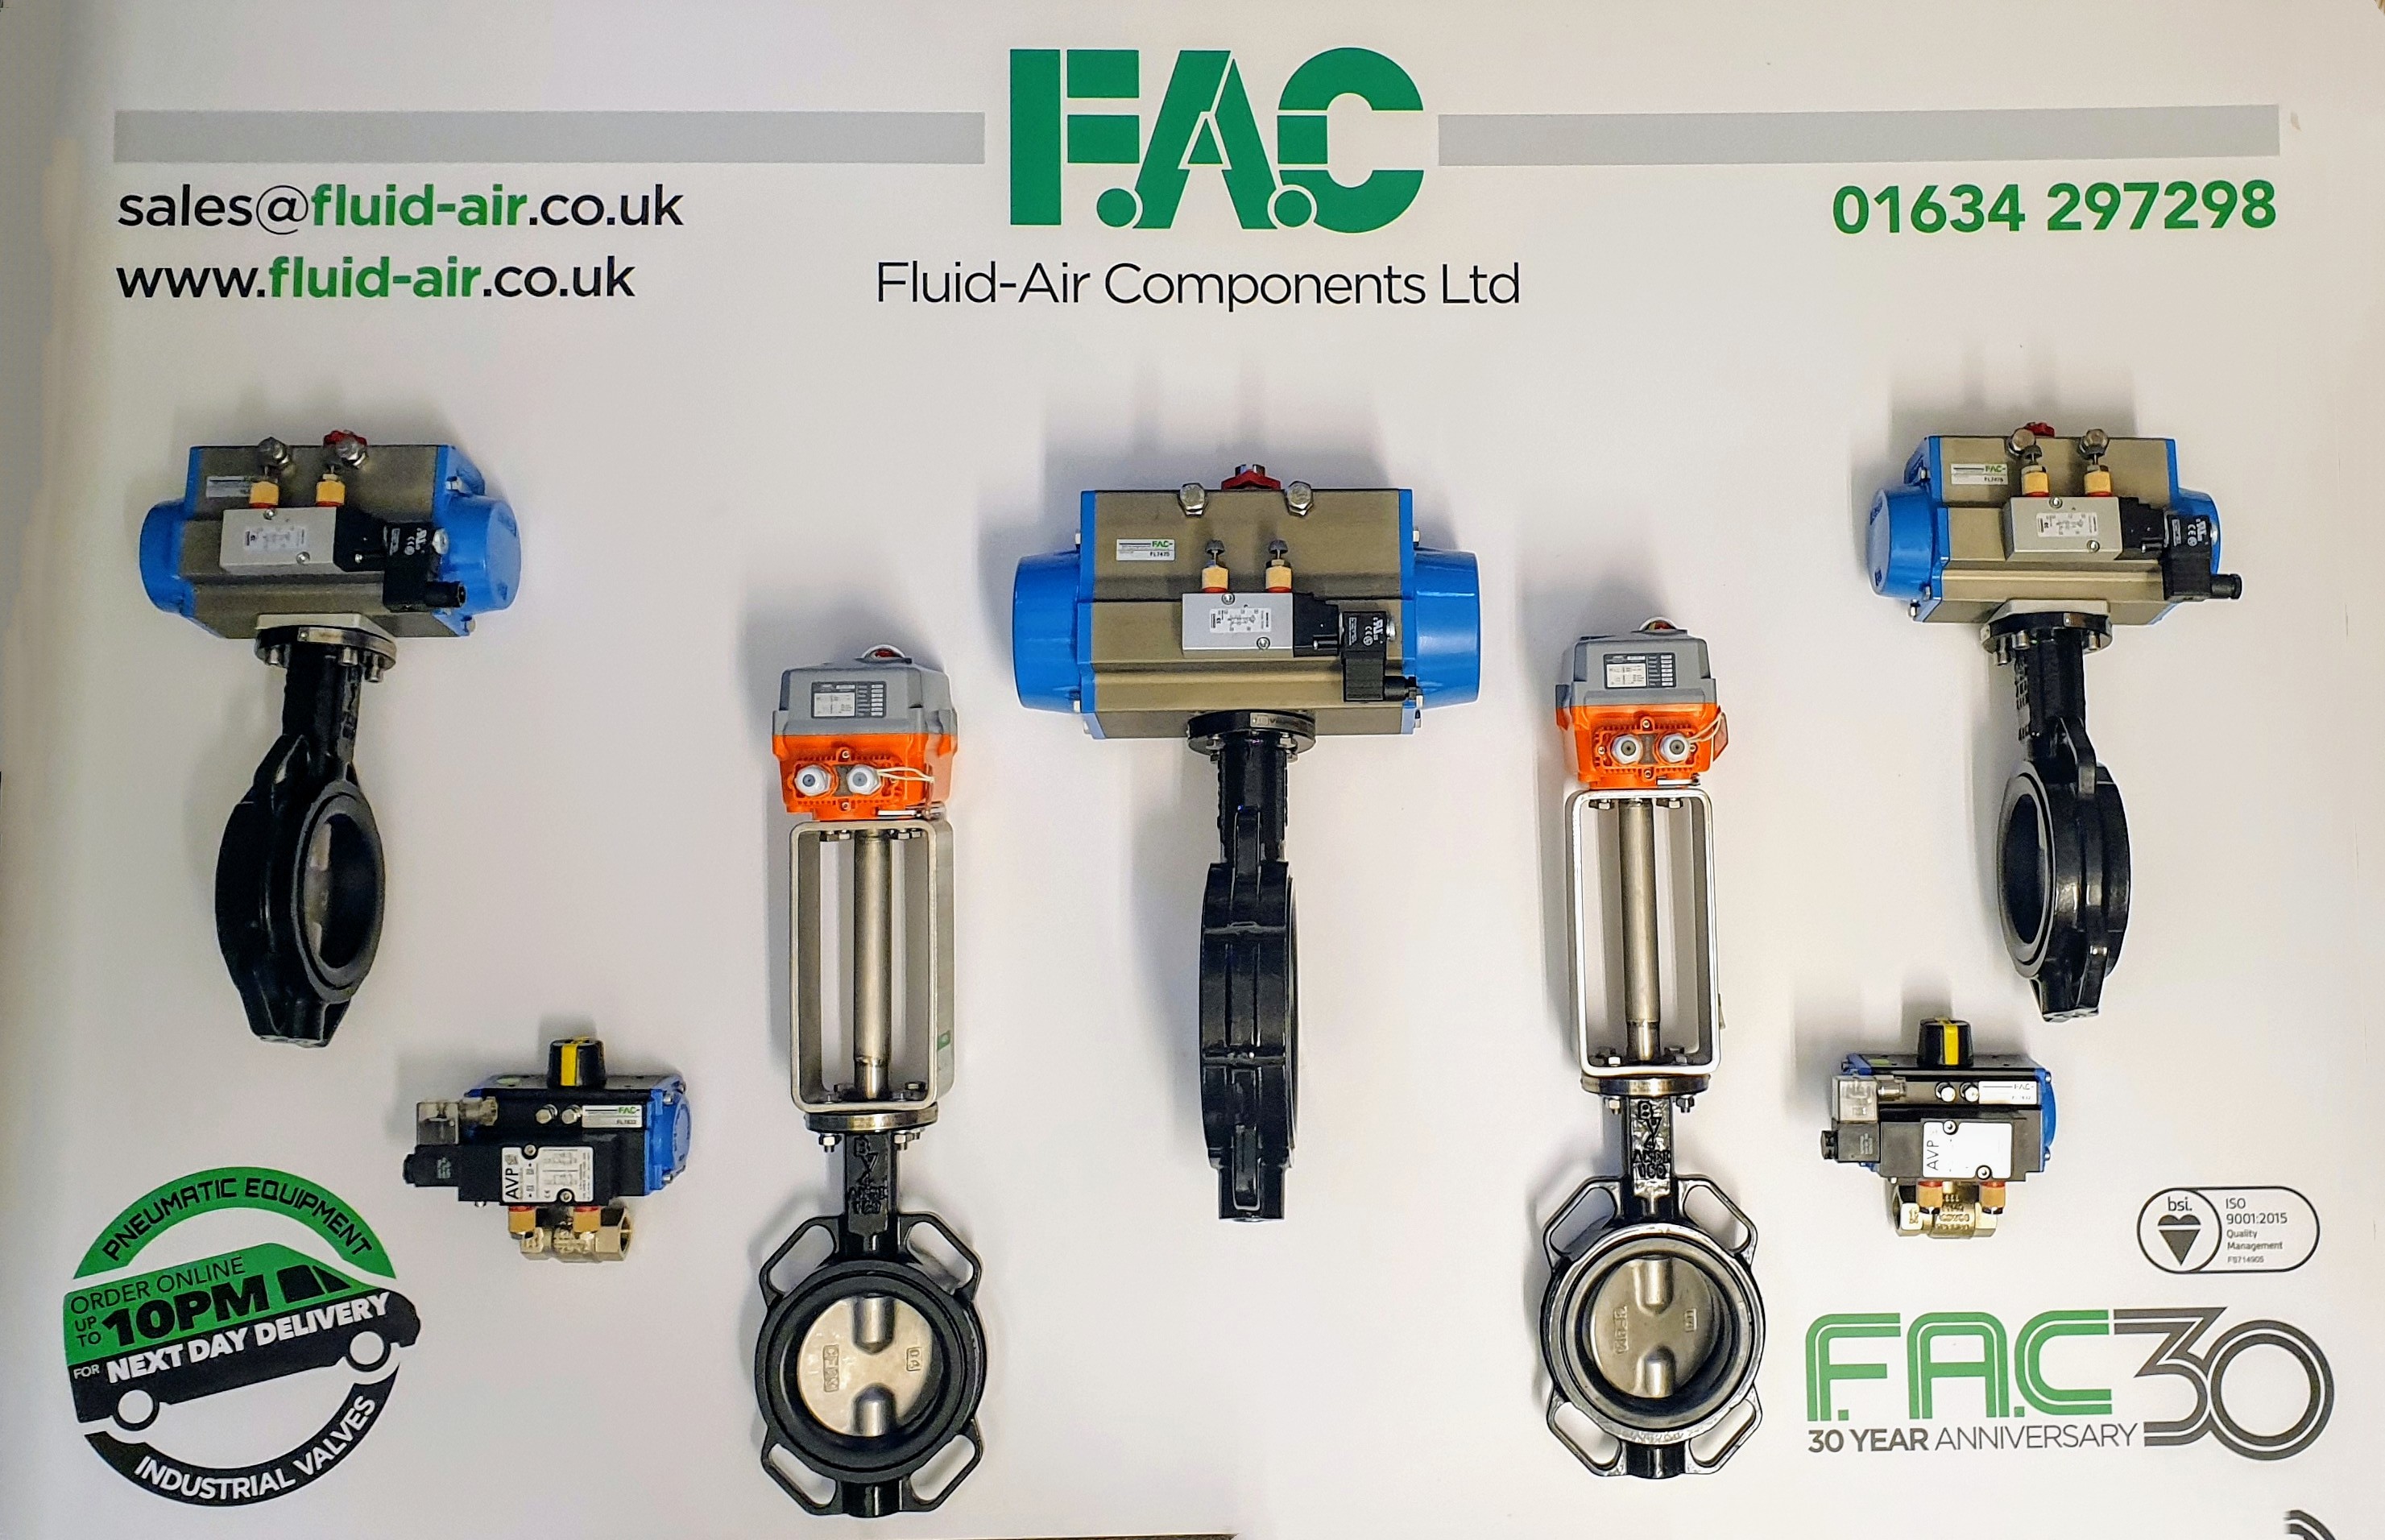 Main image for Fluid-Air Components Ltd